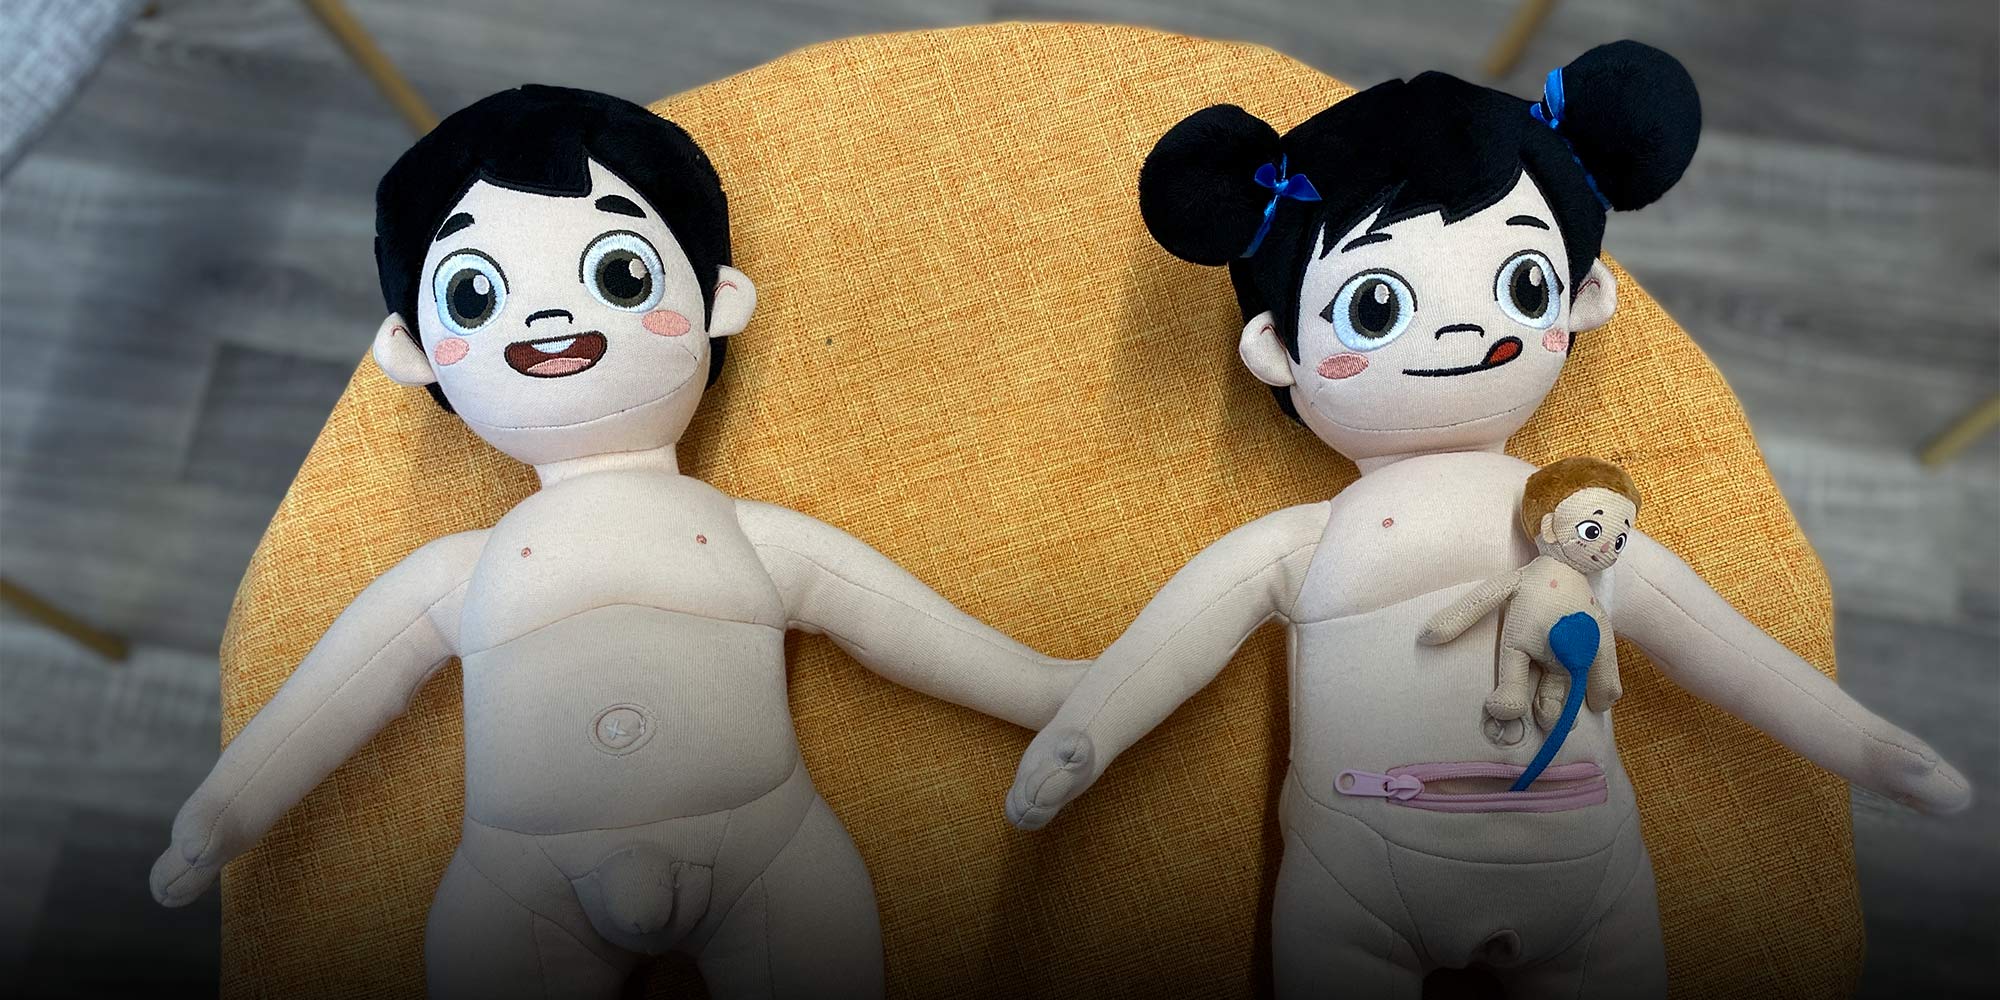 Doll for sex in Hangzhou